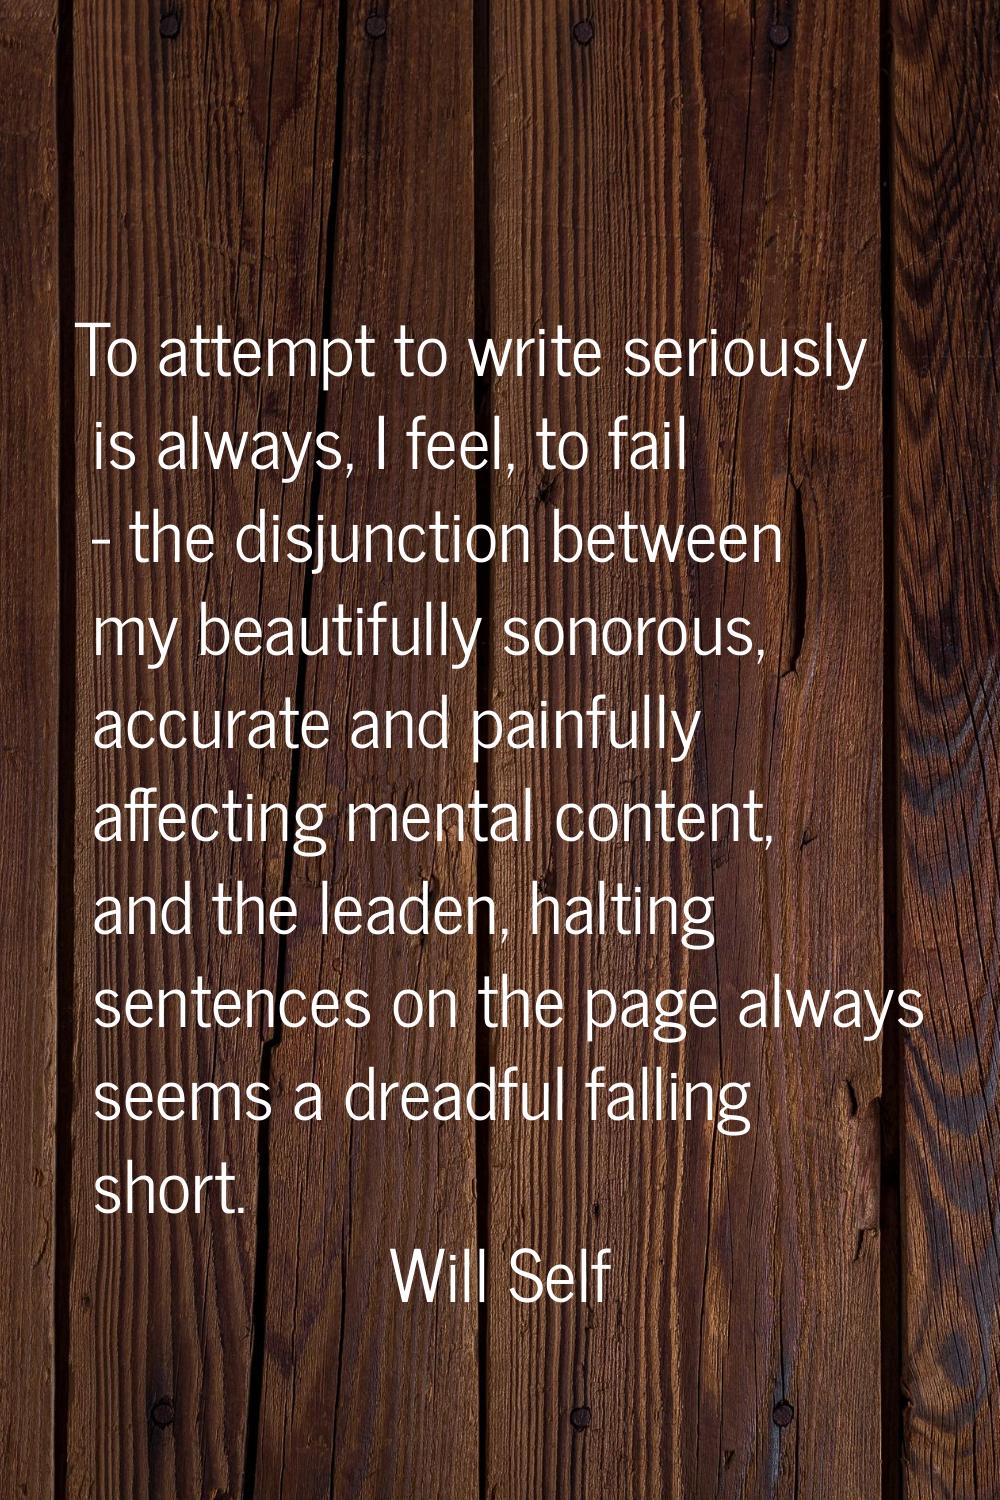 To attempt to write seriously is always, I feel, to fail - the disjunction between my beautifully s